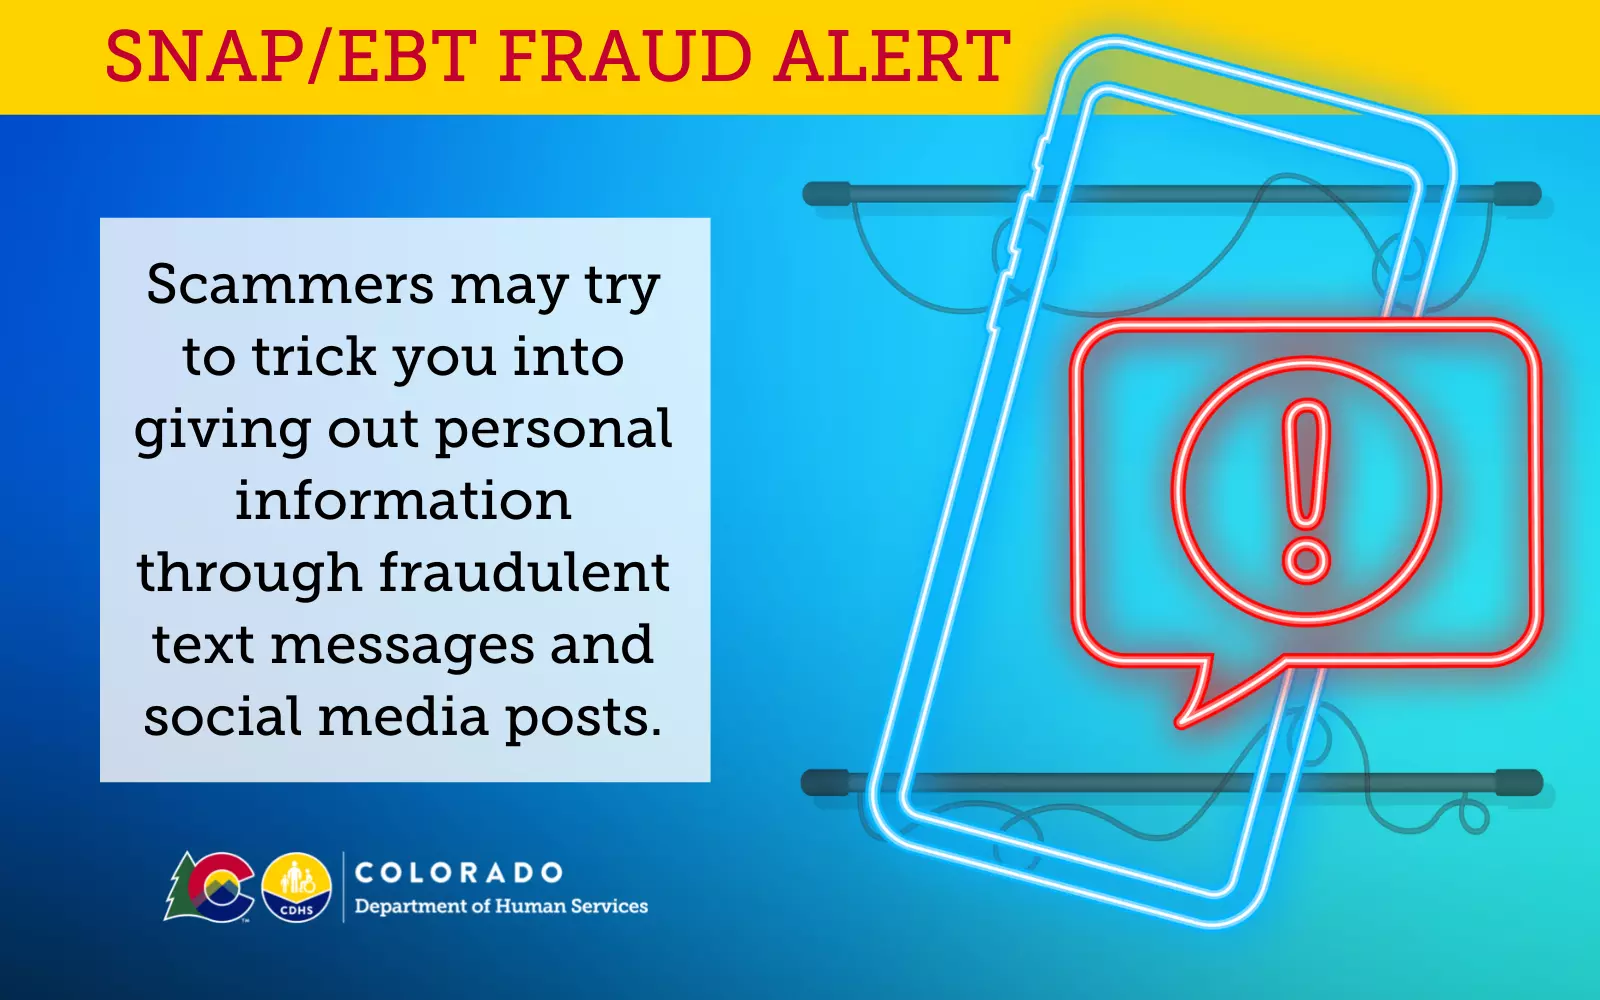 Graphic that says "SNAP/EBT fraud alert: Scammers may try to trick you into giving out personal information through fraudulent text messages and social media posts."